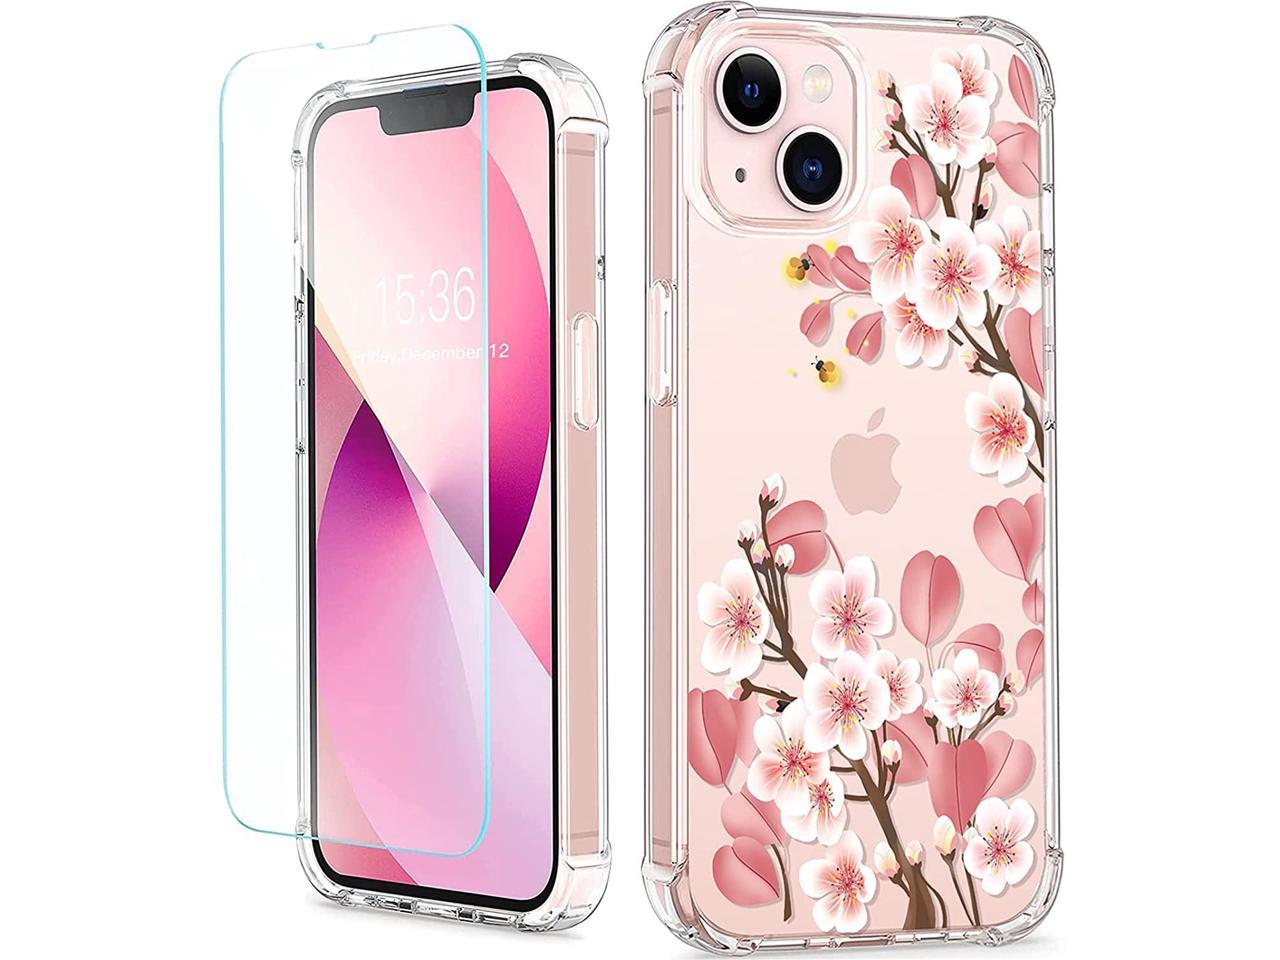 6.7 inch_2021 Release Fireflies RoseParrot Case for iPhone 13 Pro Max, Soft&Flexible Transparent Bumper Shockproof Protective Cover Clear with Pattern Design